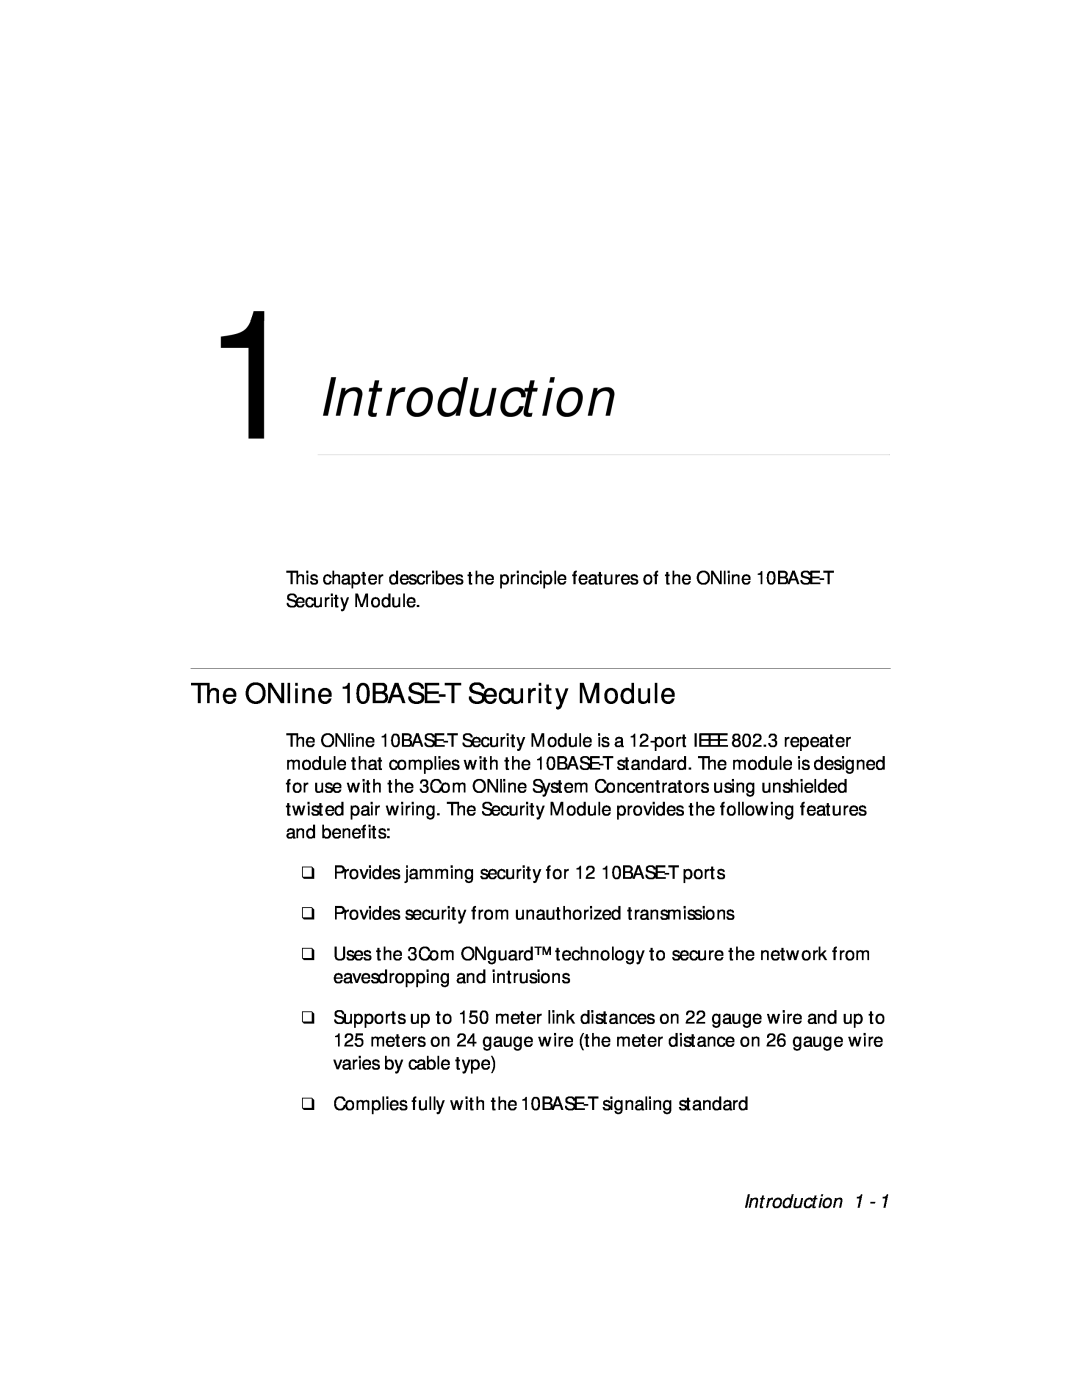 3Com 5112M-TPLS installation and operation guide The ONline 10BASE-T Security Module, Introduction 1 